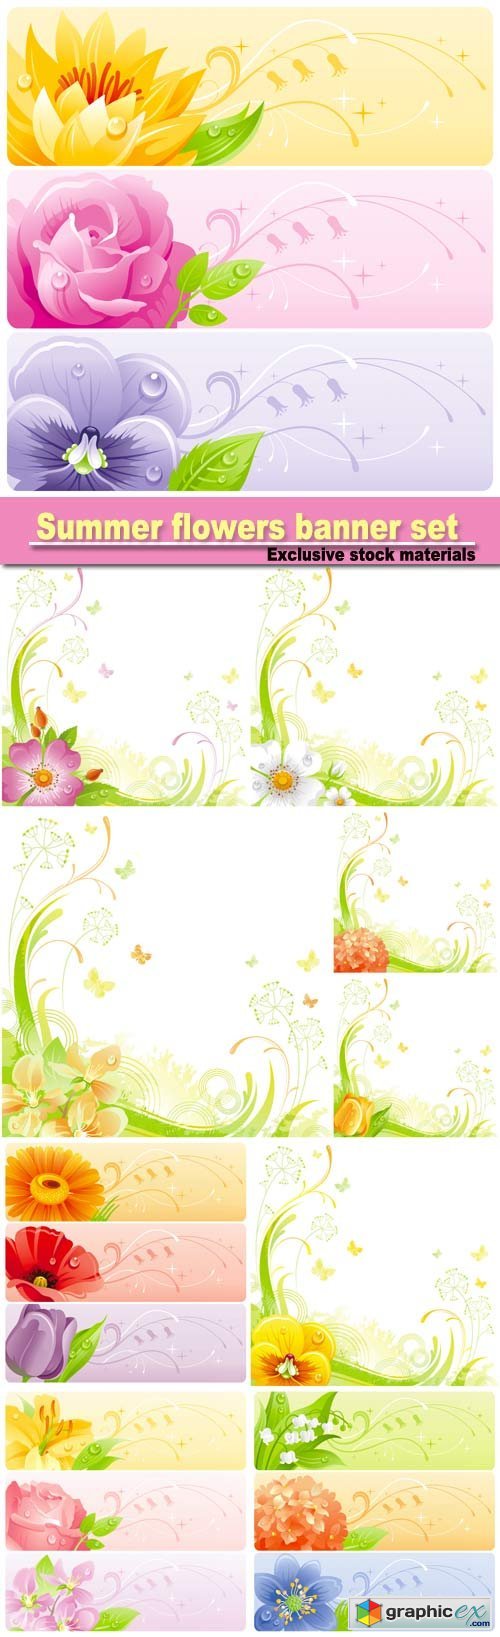 Summer flowers banner set with natural background